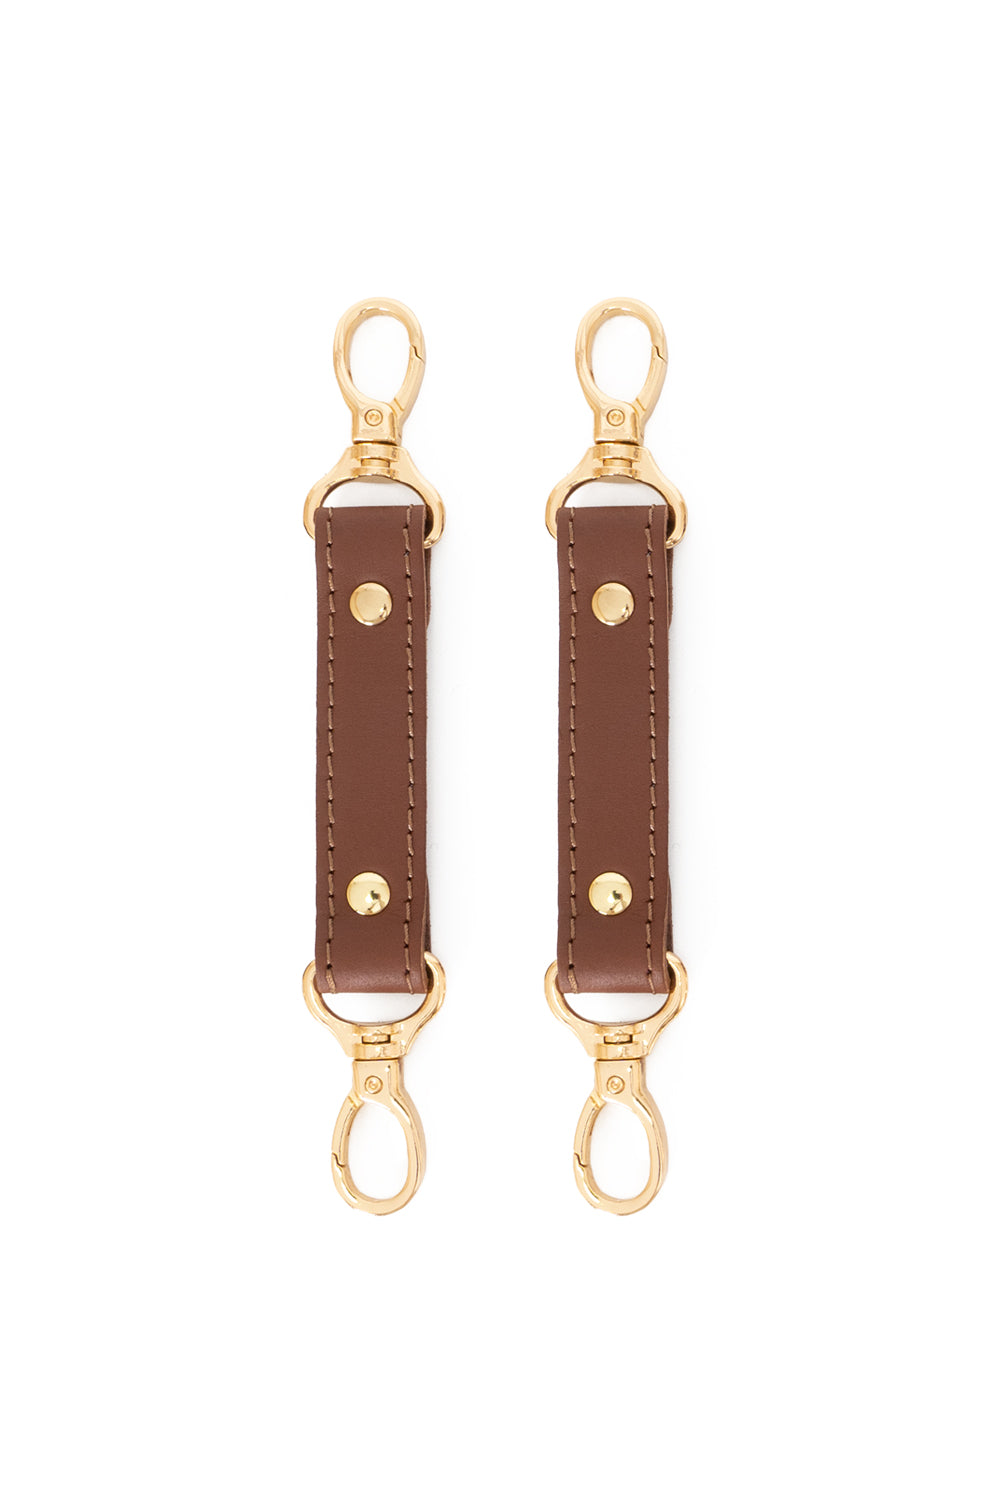 2-Way Leather Connector. Set of 2 Short Straps for Fixation